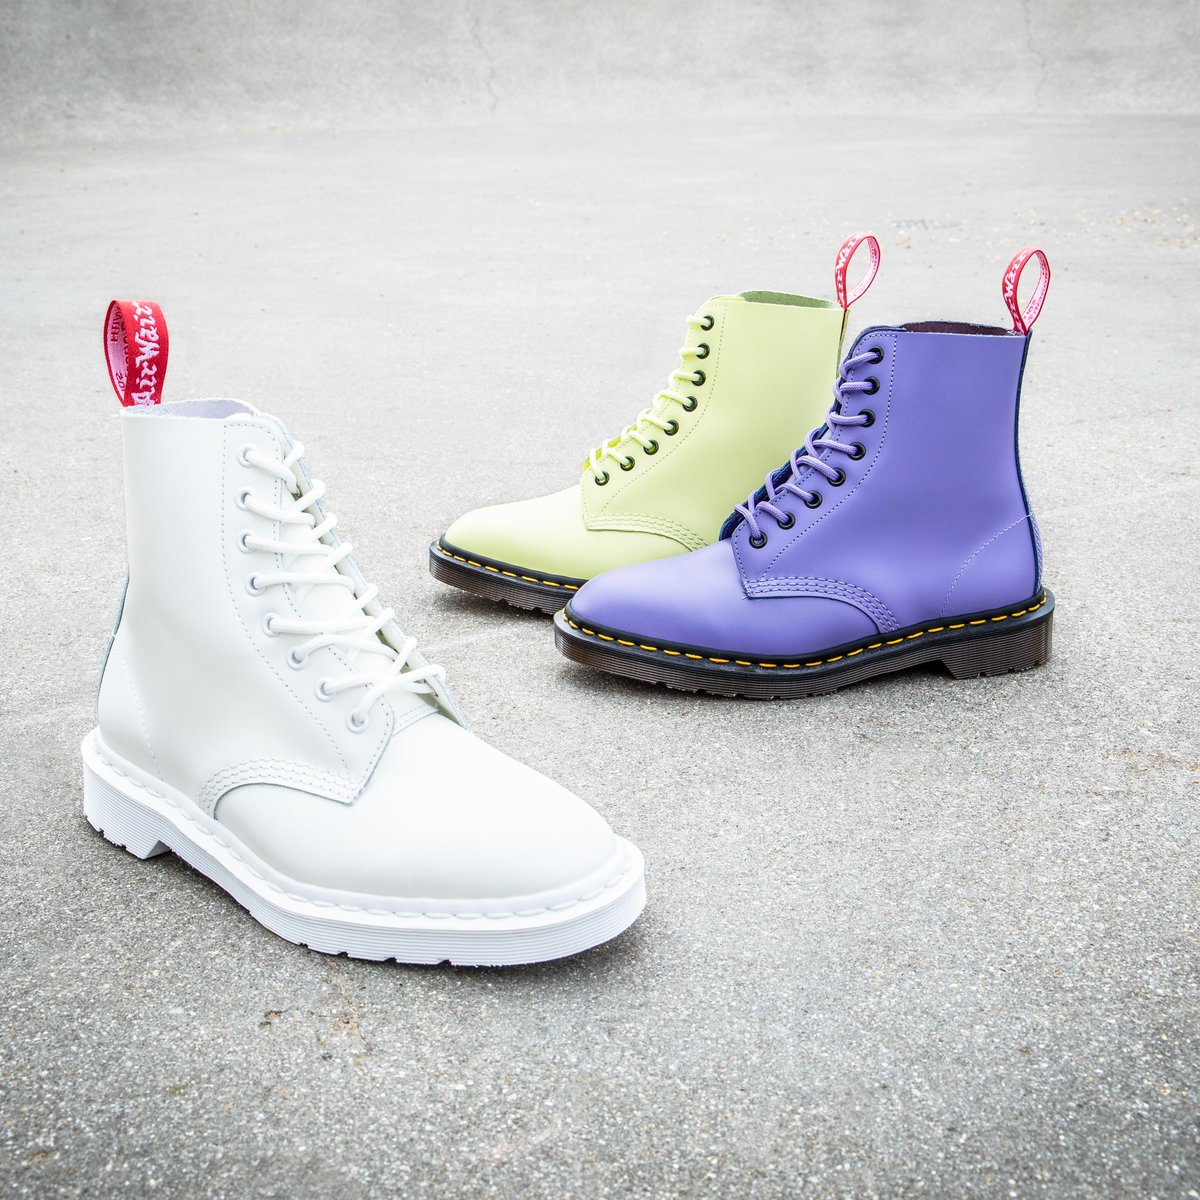 UNDERCOVER ×Dr.Martens 8ホールブーツ - ブーツ